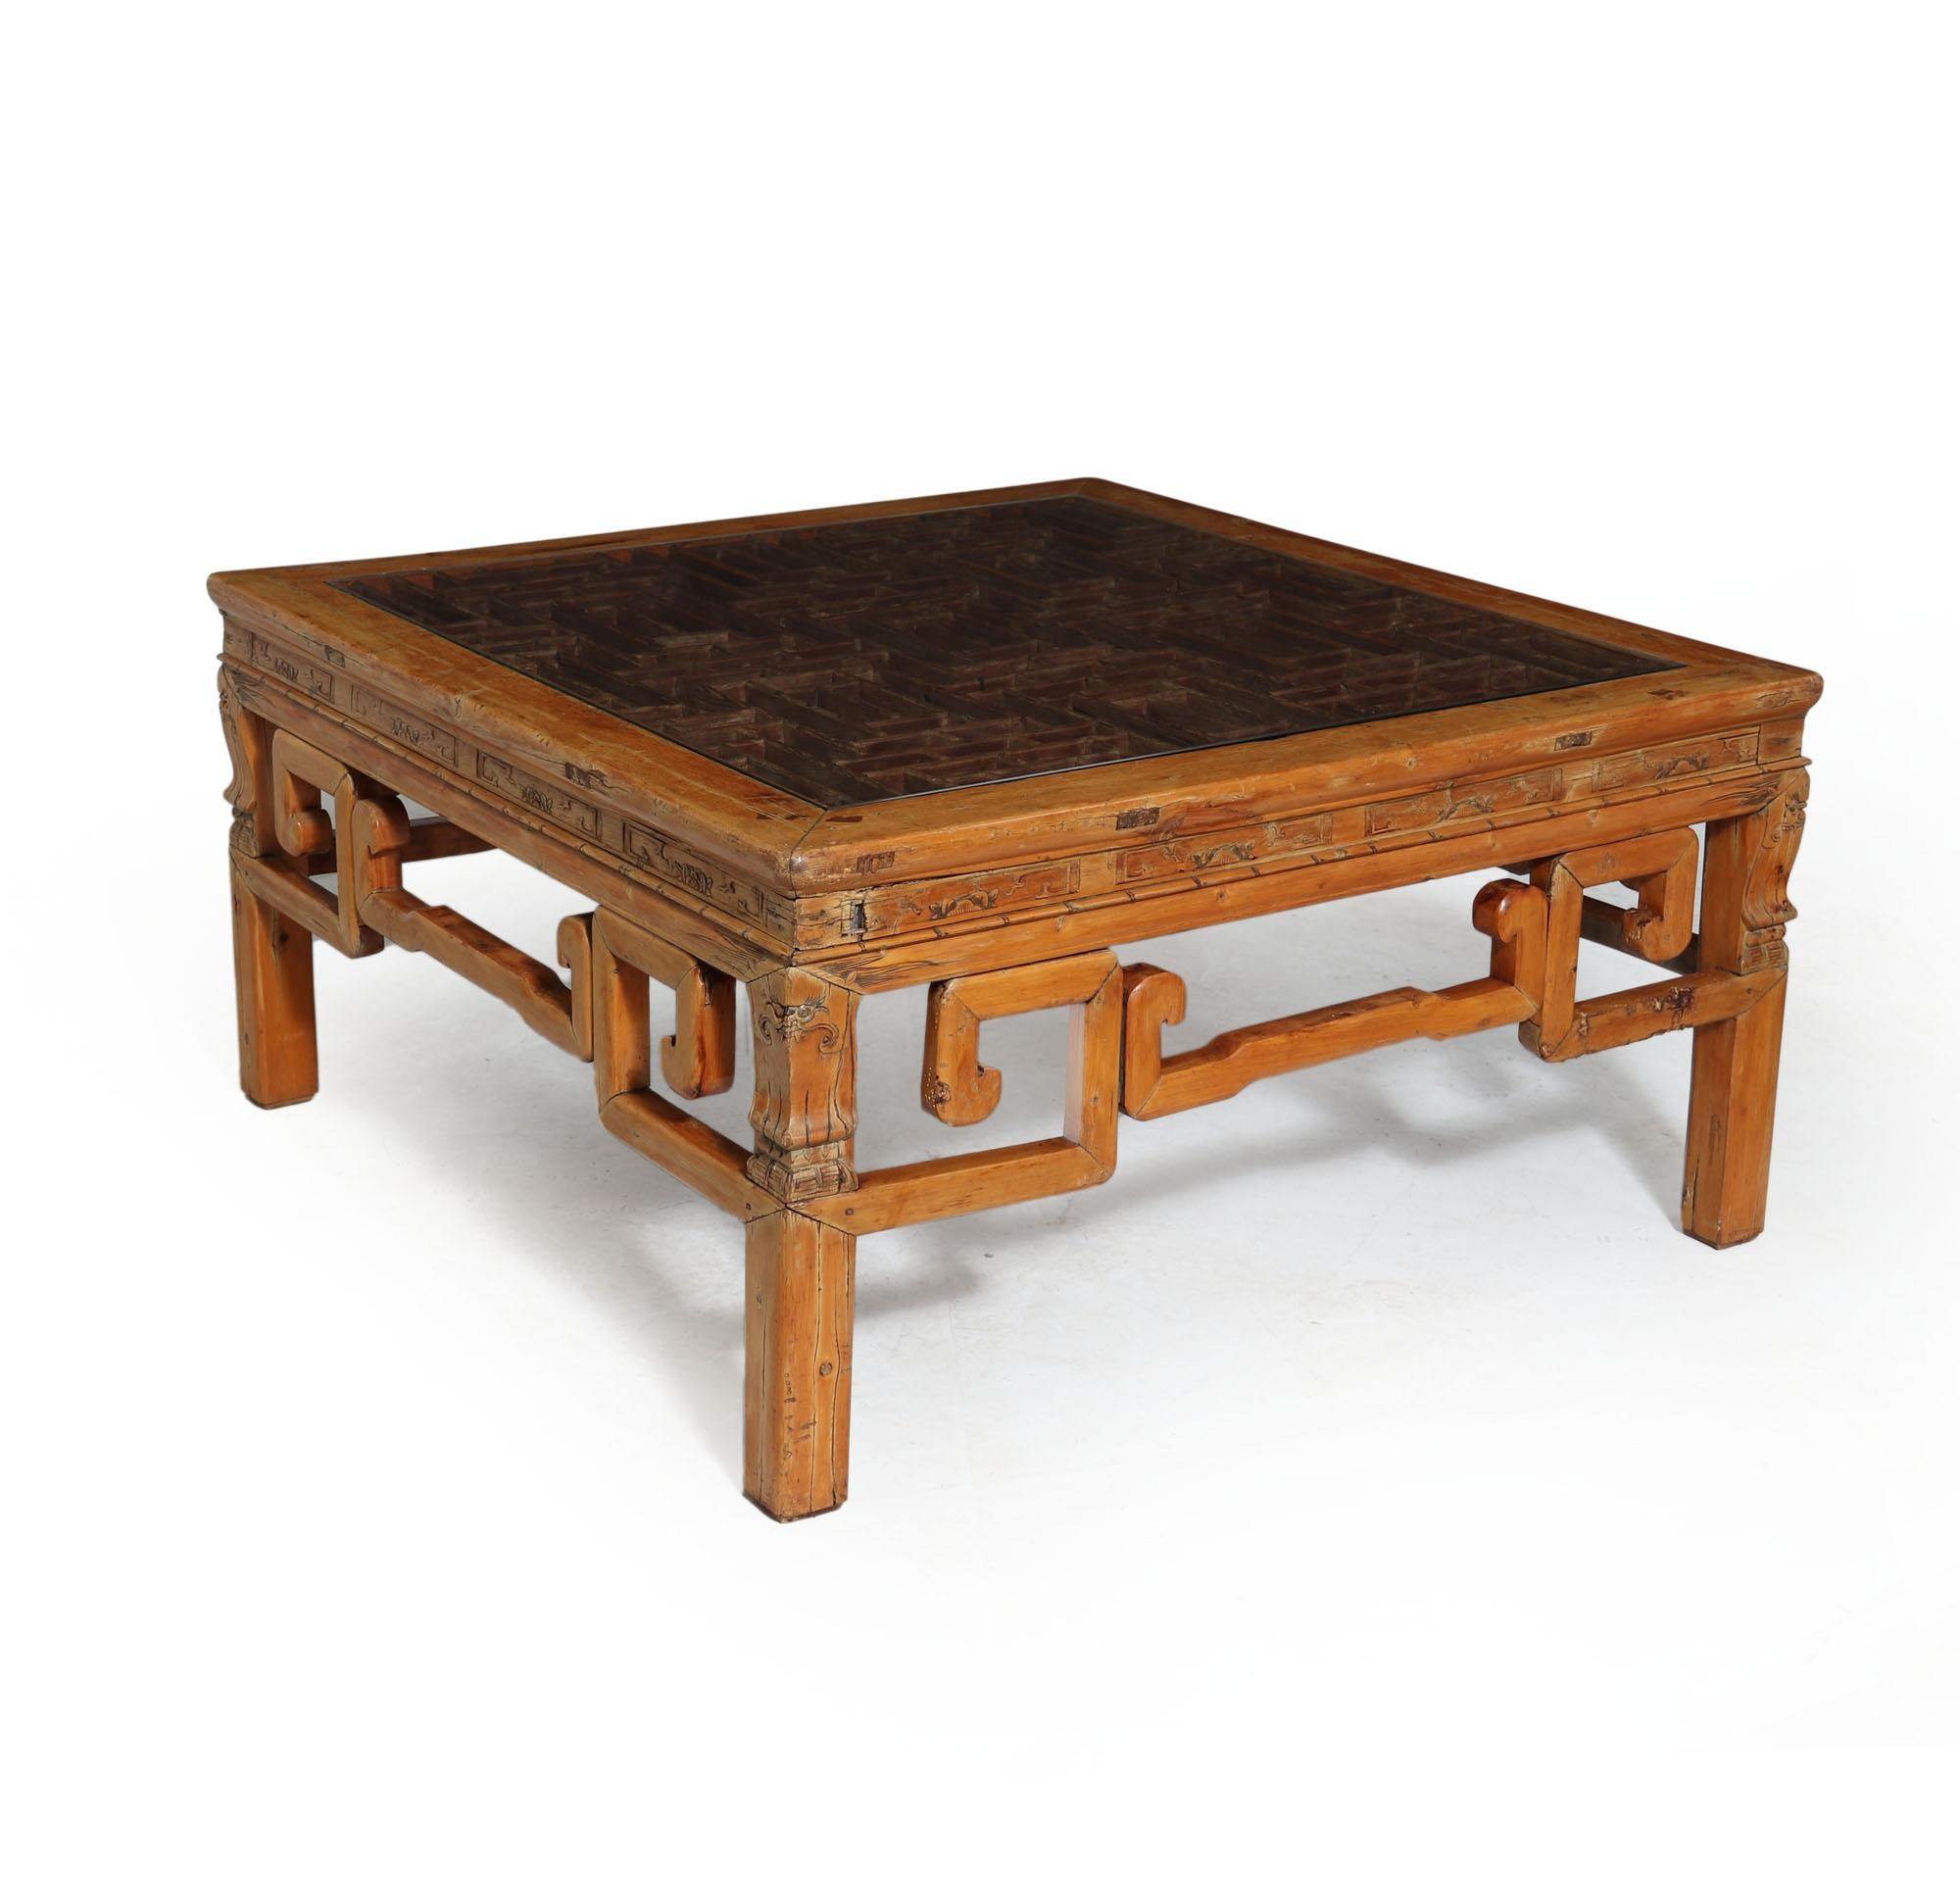 A Chinese table produced around the 1900s from hardwood with great light colour with light carved details, lattice work top and new glass top, the table is in original condition with minor losses and wear has benefitted from a wax finish
Age: